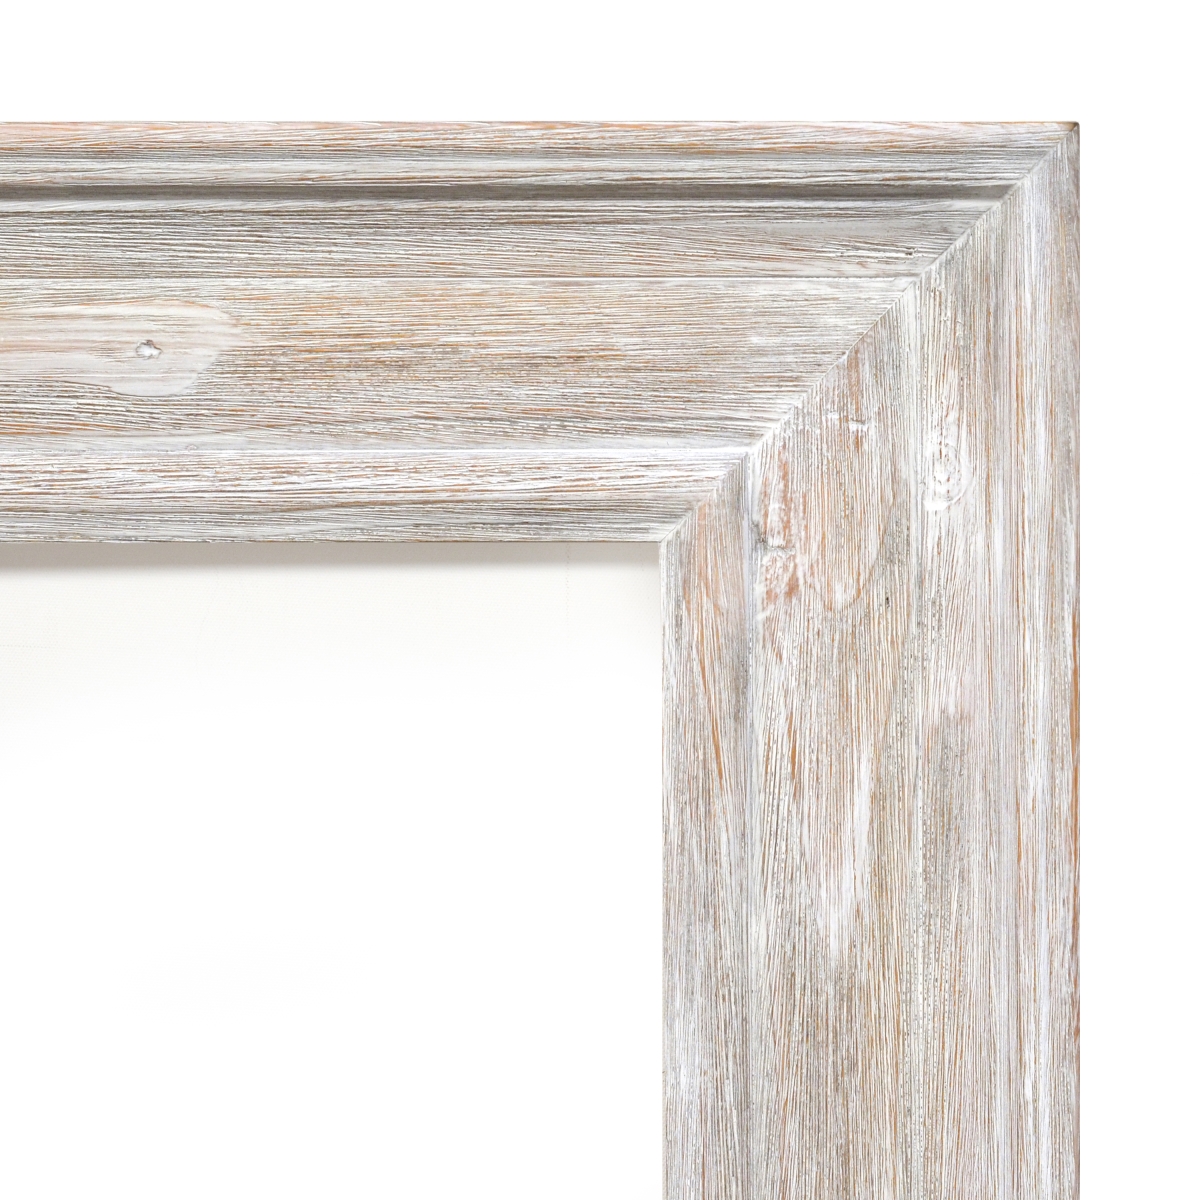 12008366 20 X 24 In. Misty Woods Frame - Distressed White Wash